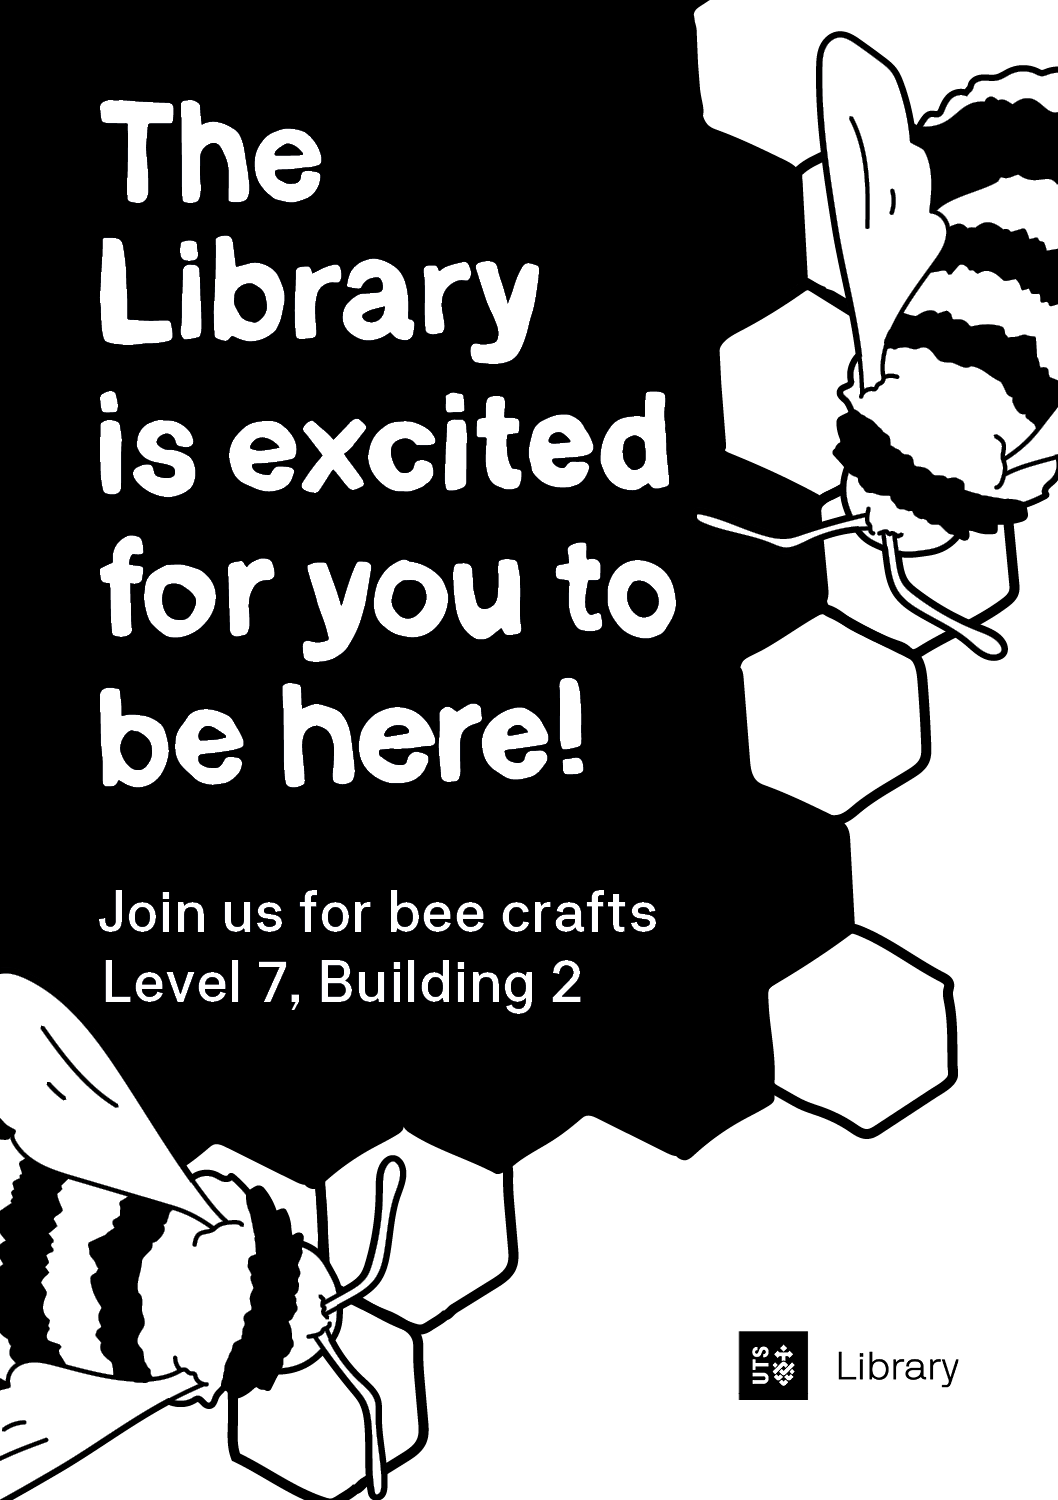 Illustrated image with text “The Library is excited for you to be here!” 